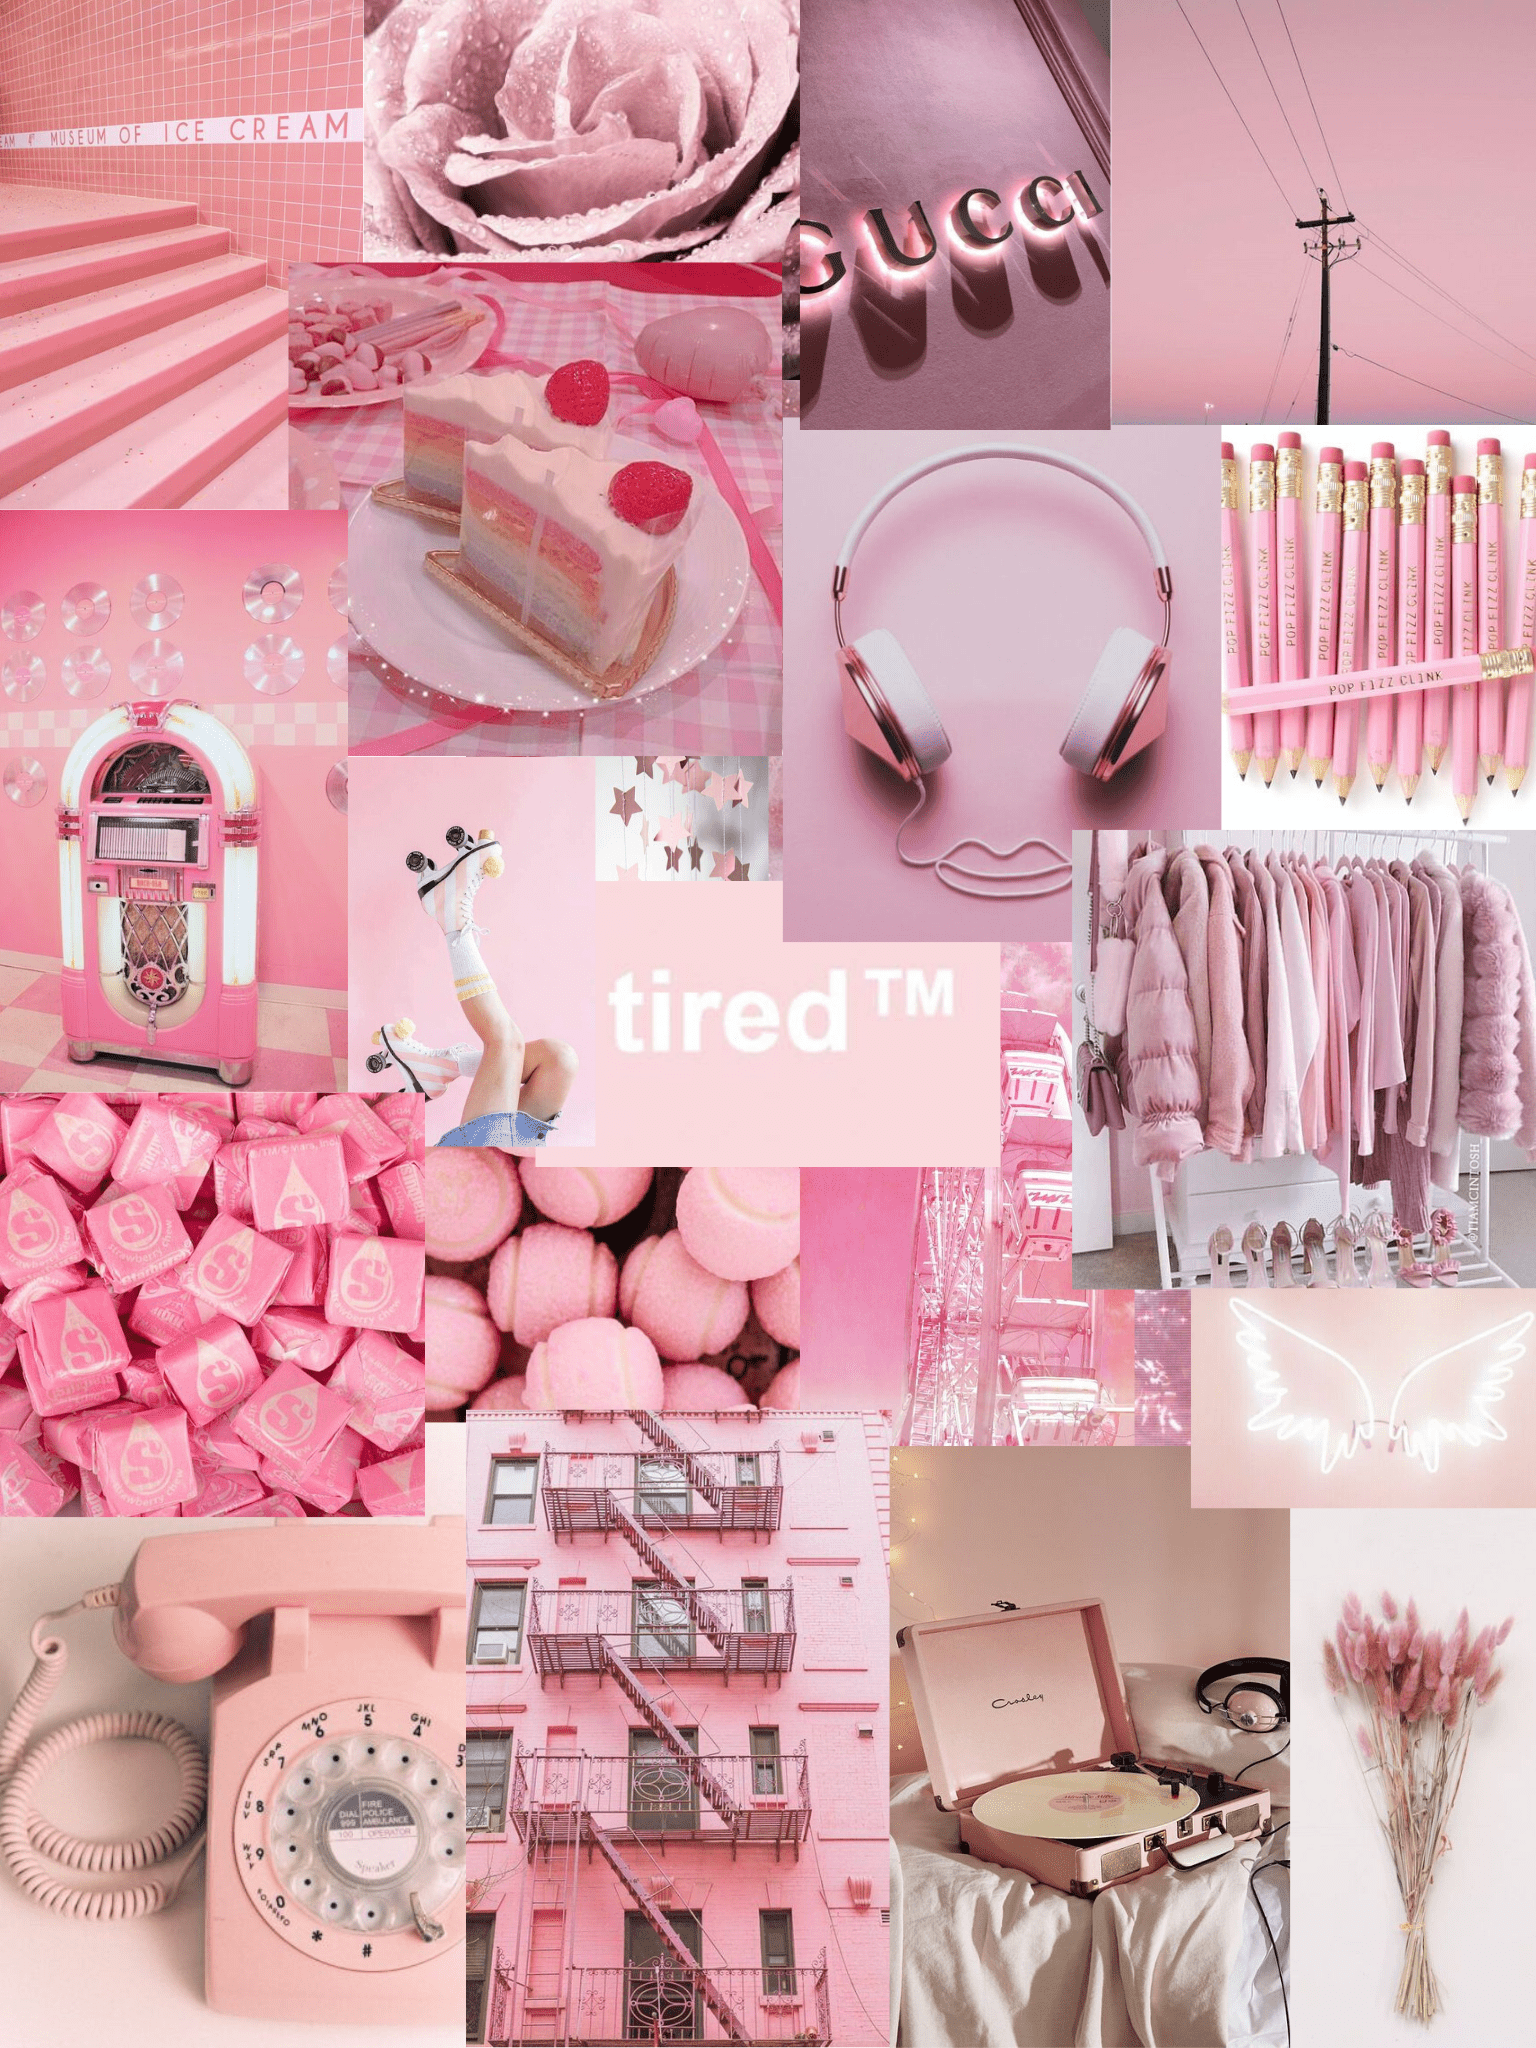 A collage of pink aesthetic images. - Pastel pink